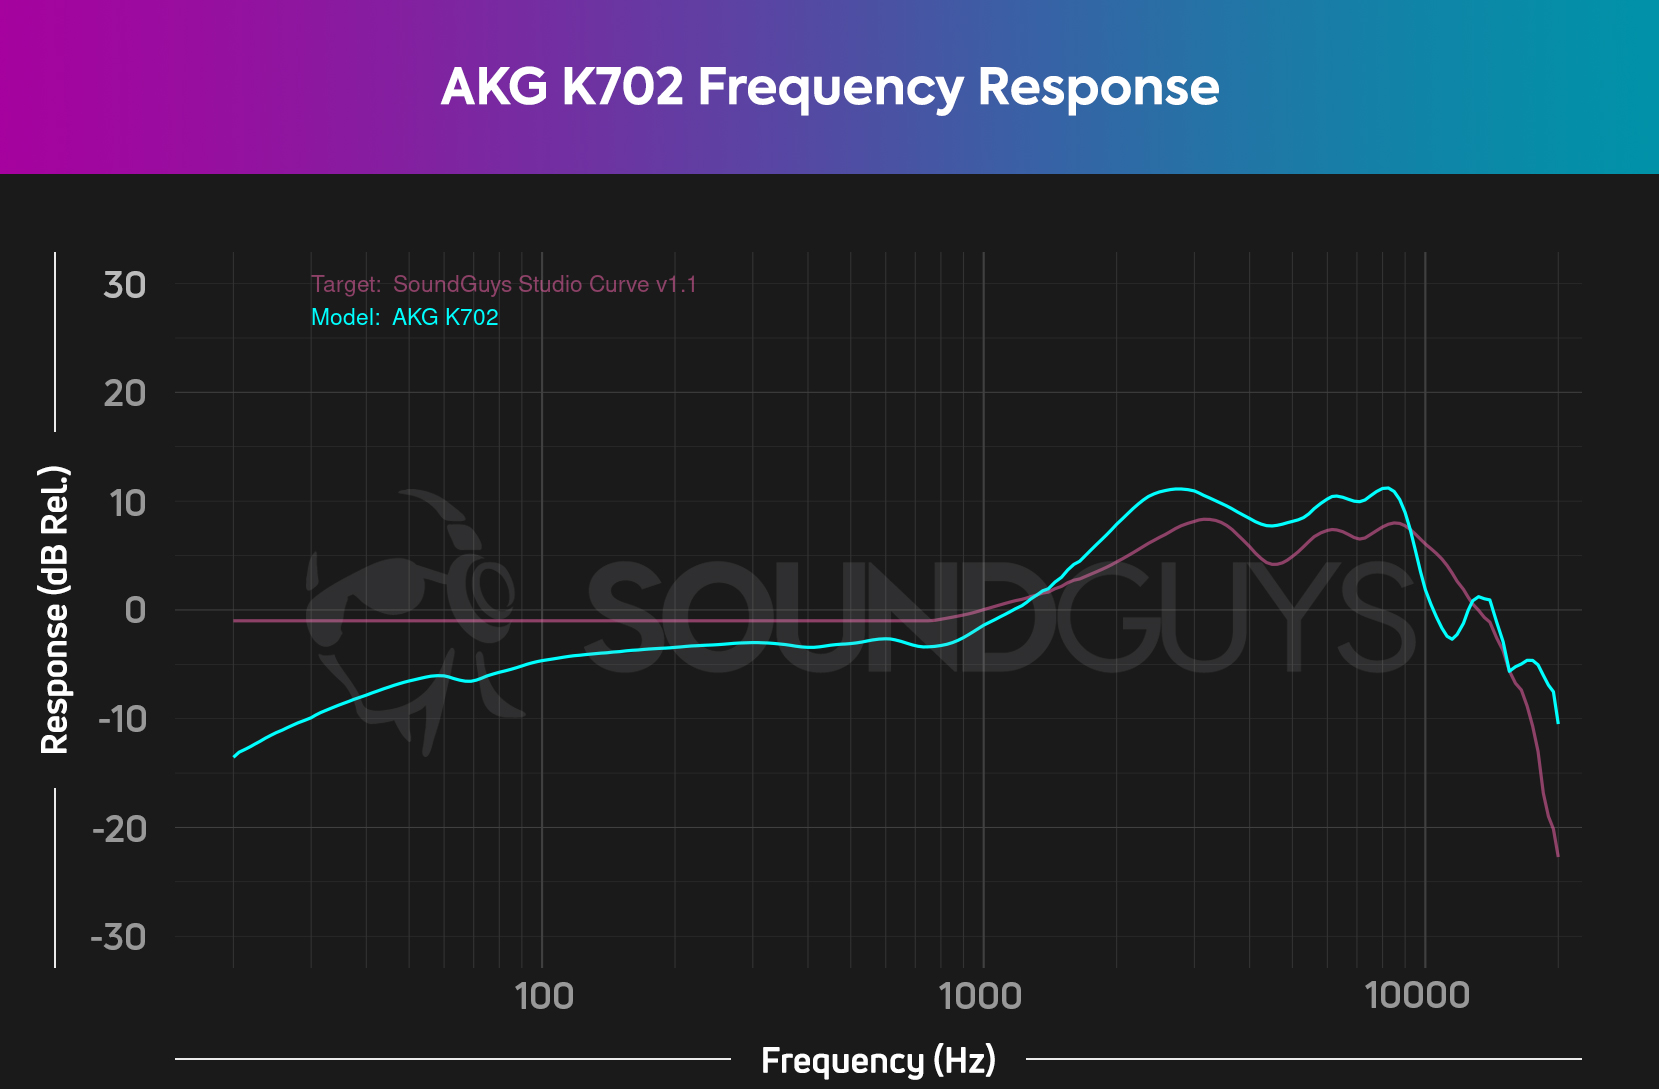 Chart shows the AKG K702 frequency response compared to our target ideal studio frequency response.